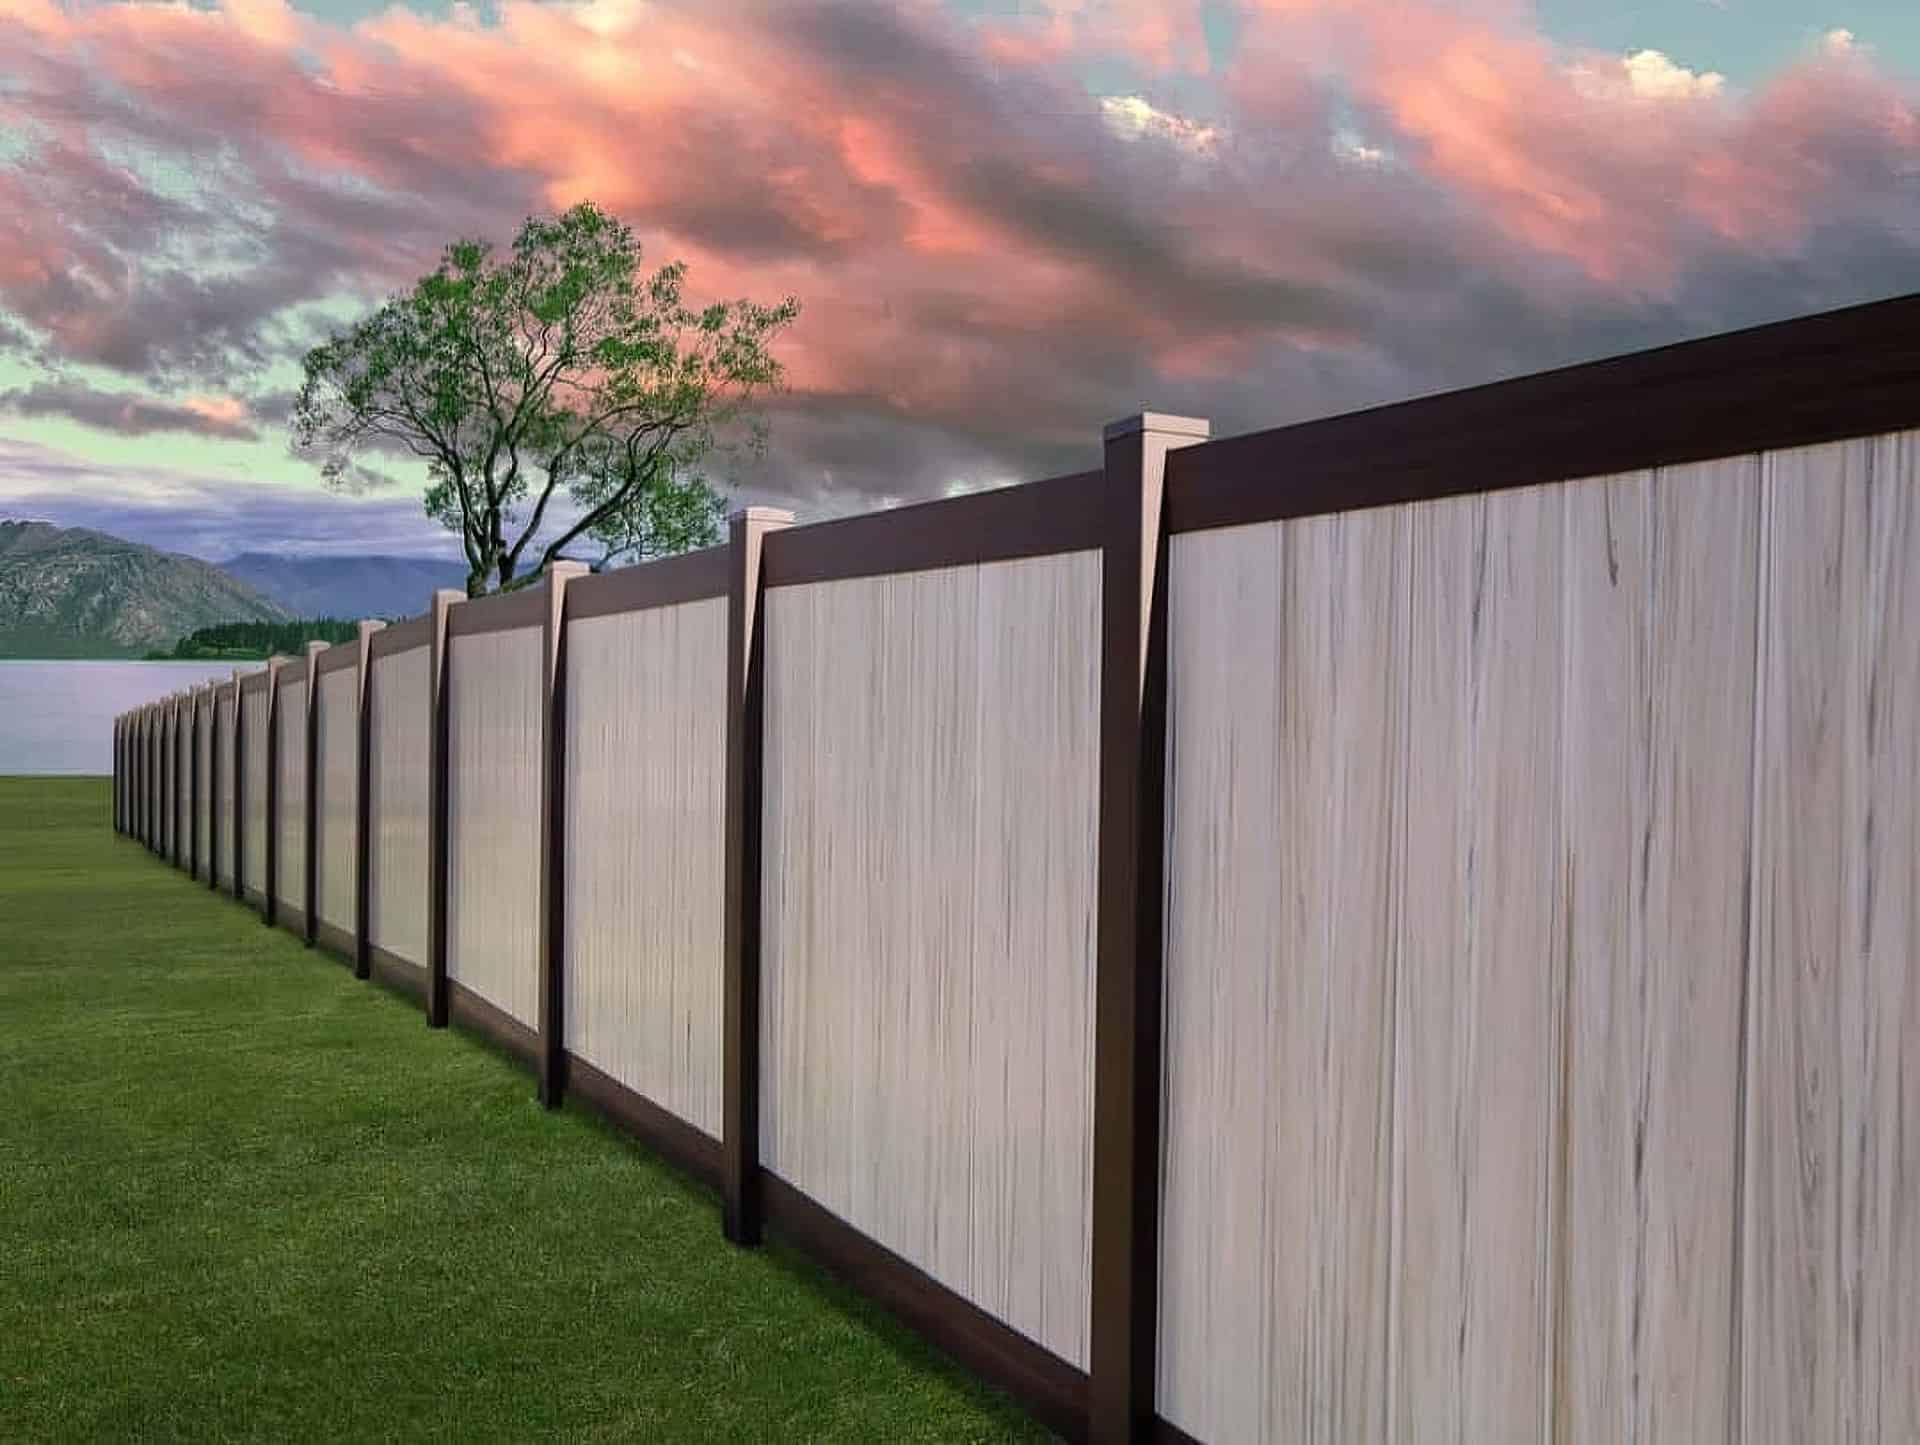 Vinyl weathered aspen colored fence in front of large tree on grassy lawn with a picturesque view of the mountains.